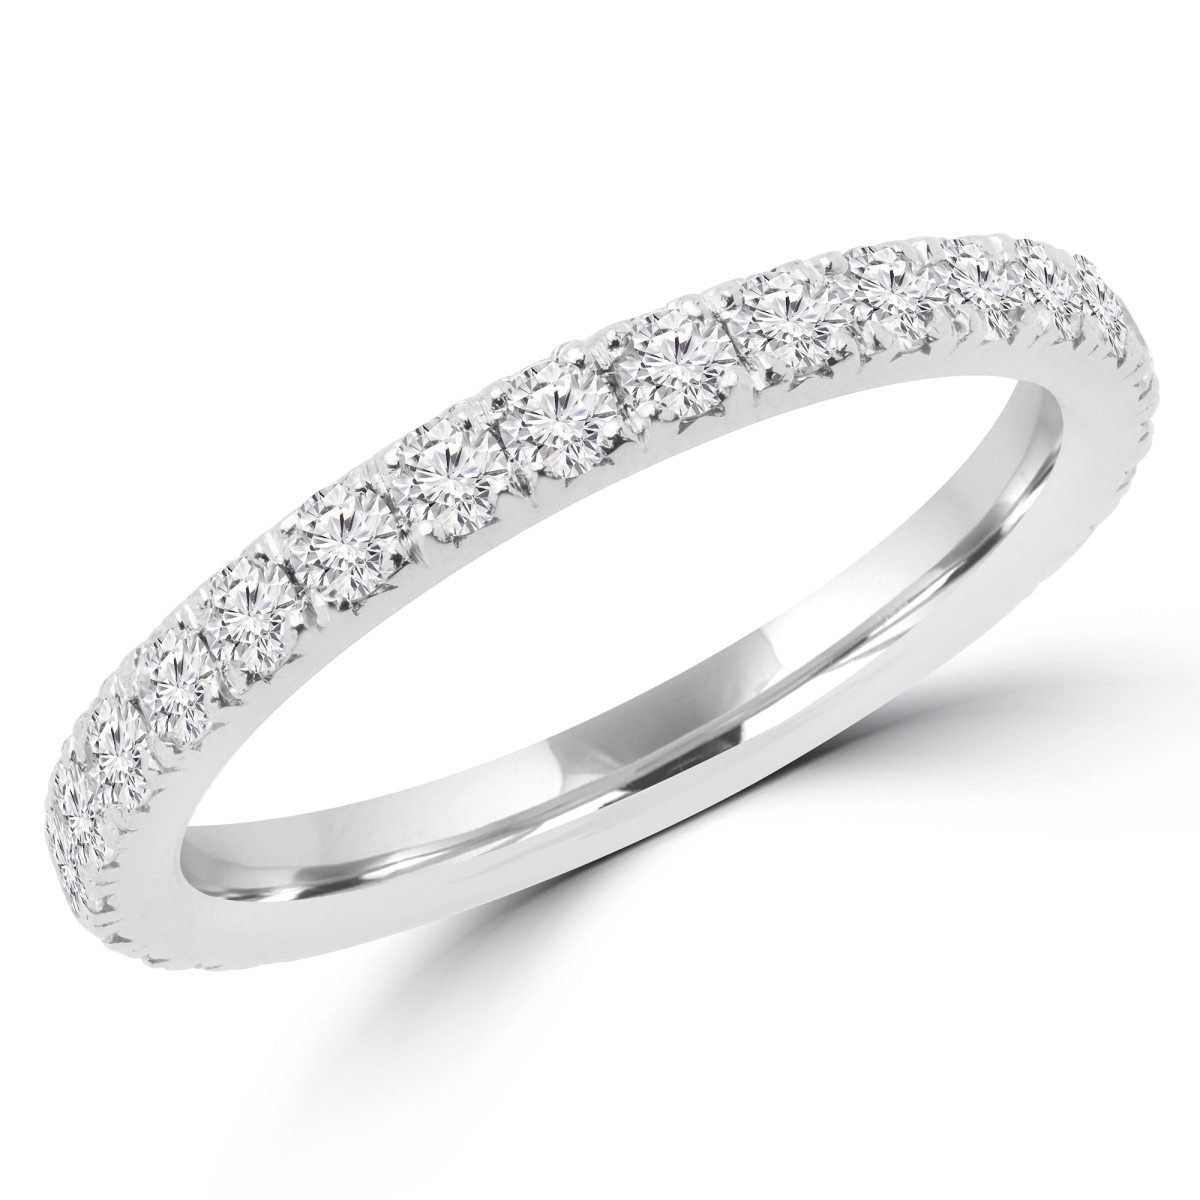 Picture of Majesty Diamonds MD170308-8.25 0.66 CTW Round Diamond Semi-Eternity Wedding Band Ring in 14K White Gold - Size 8.25